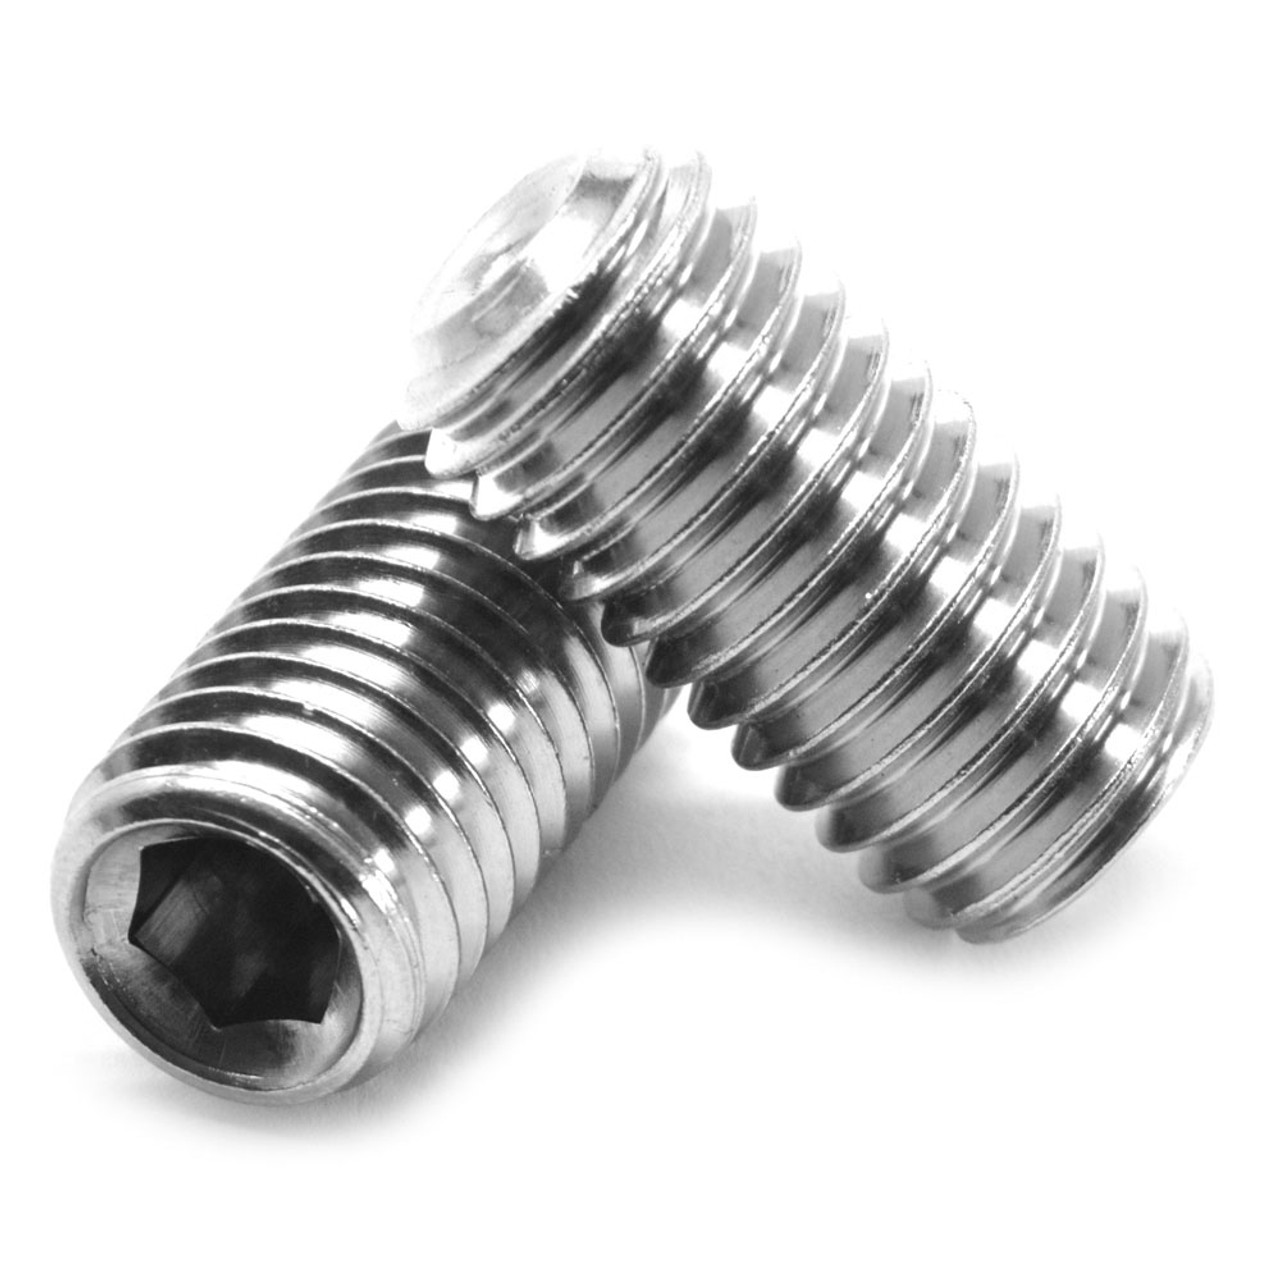 5/16"-18 x 1 3/4" Coarse Thread Socket Set Screw Cup Point Stainless Steel 18-8